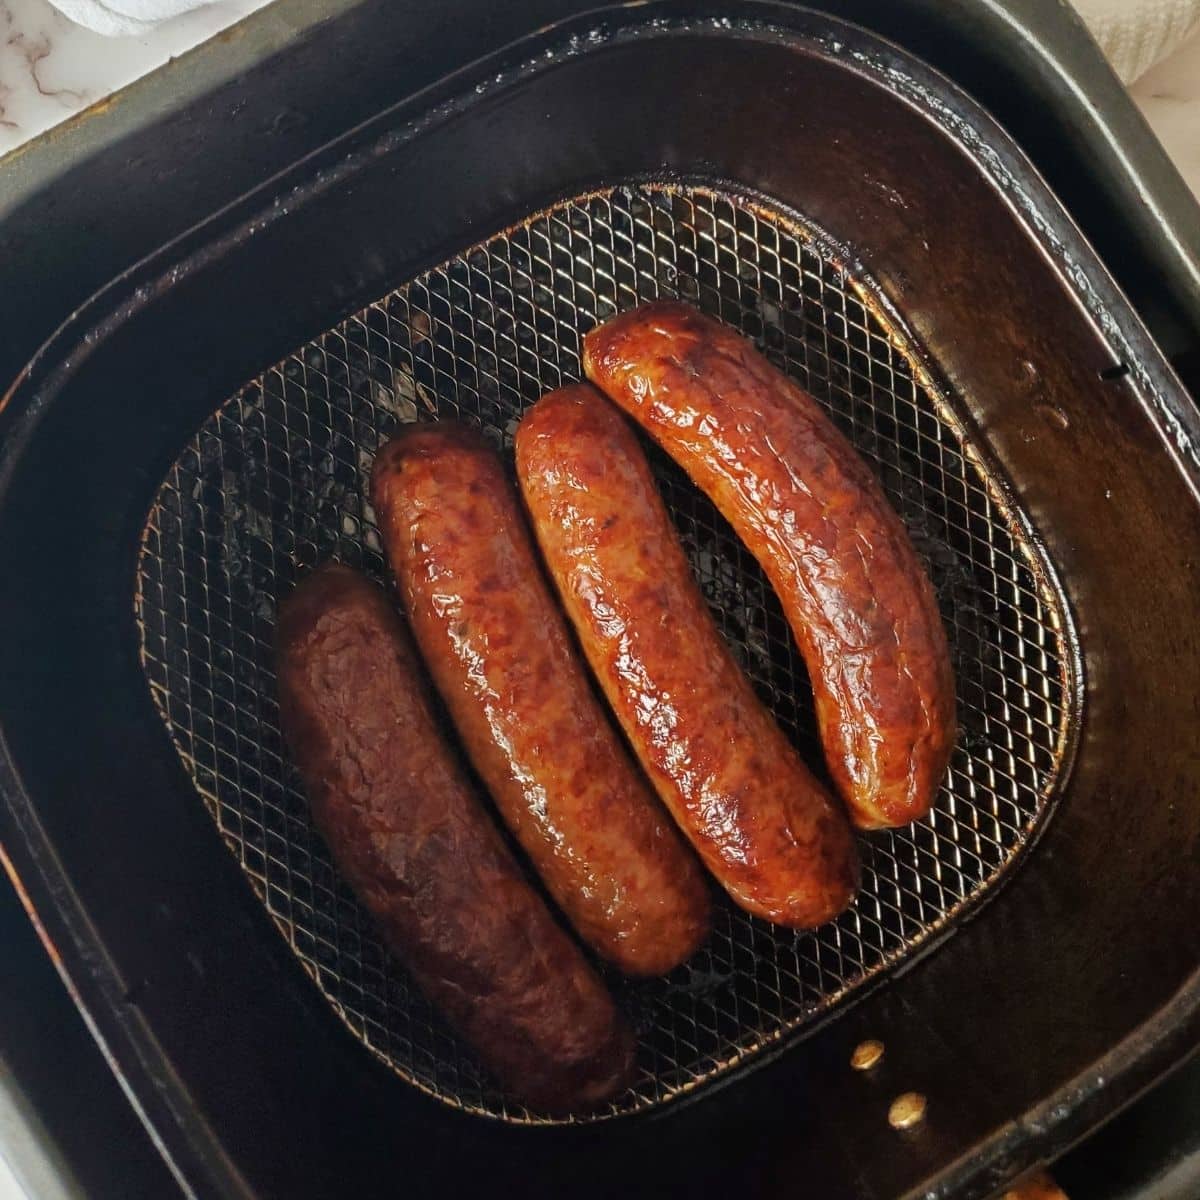 4 cooked Italian sausages in the air fryer. 